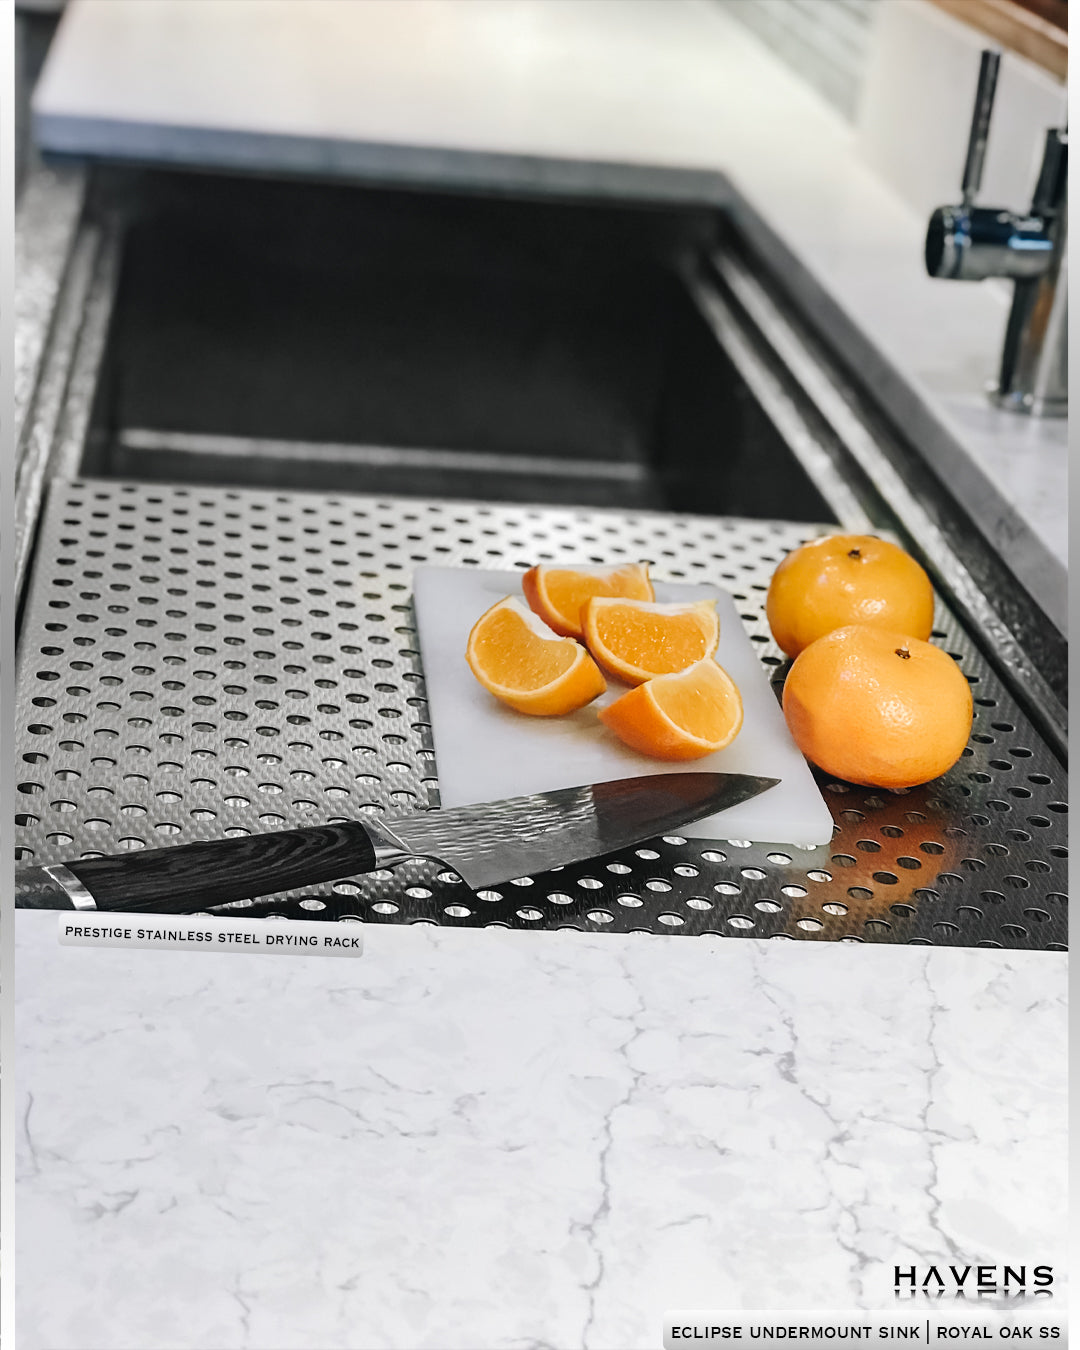 Eclipse Dual-Tier Farmhouse Sink - Stainless Steel